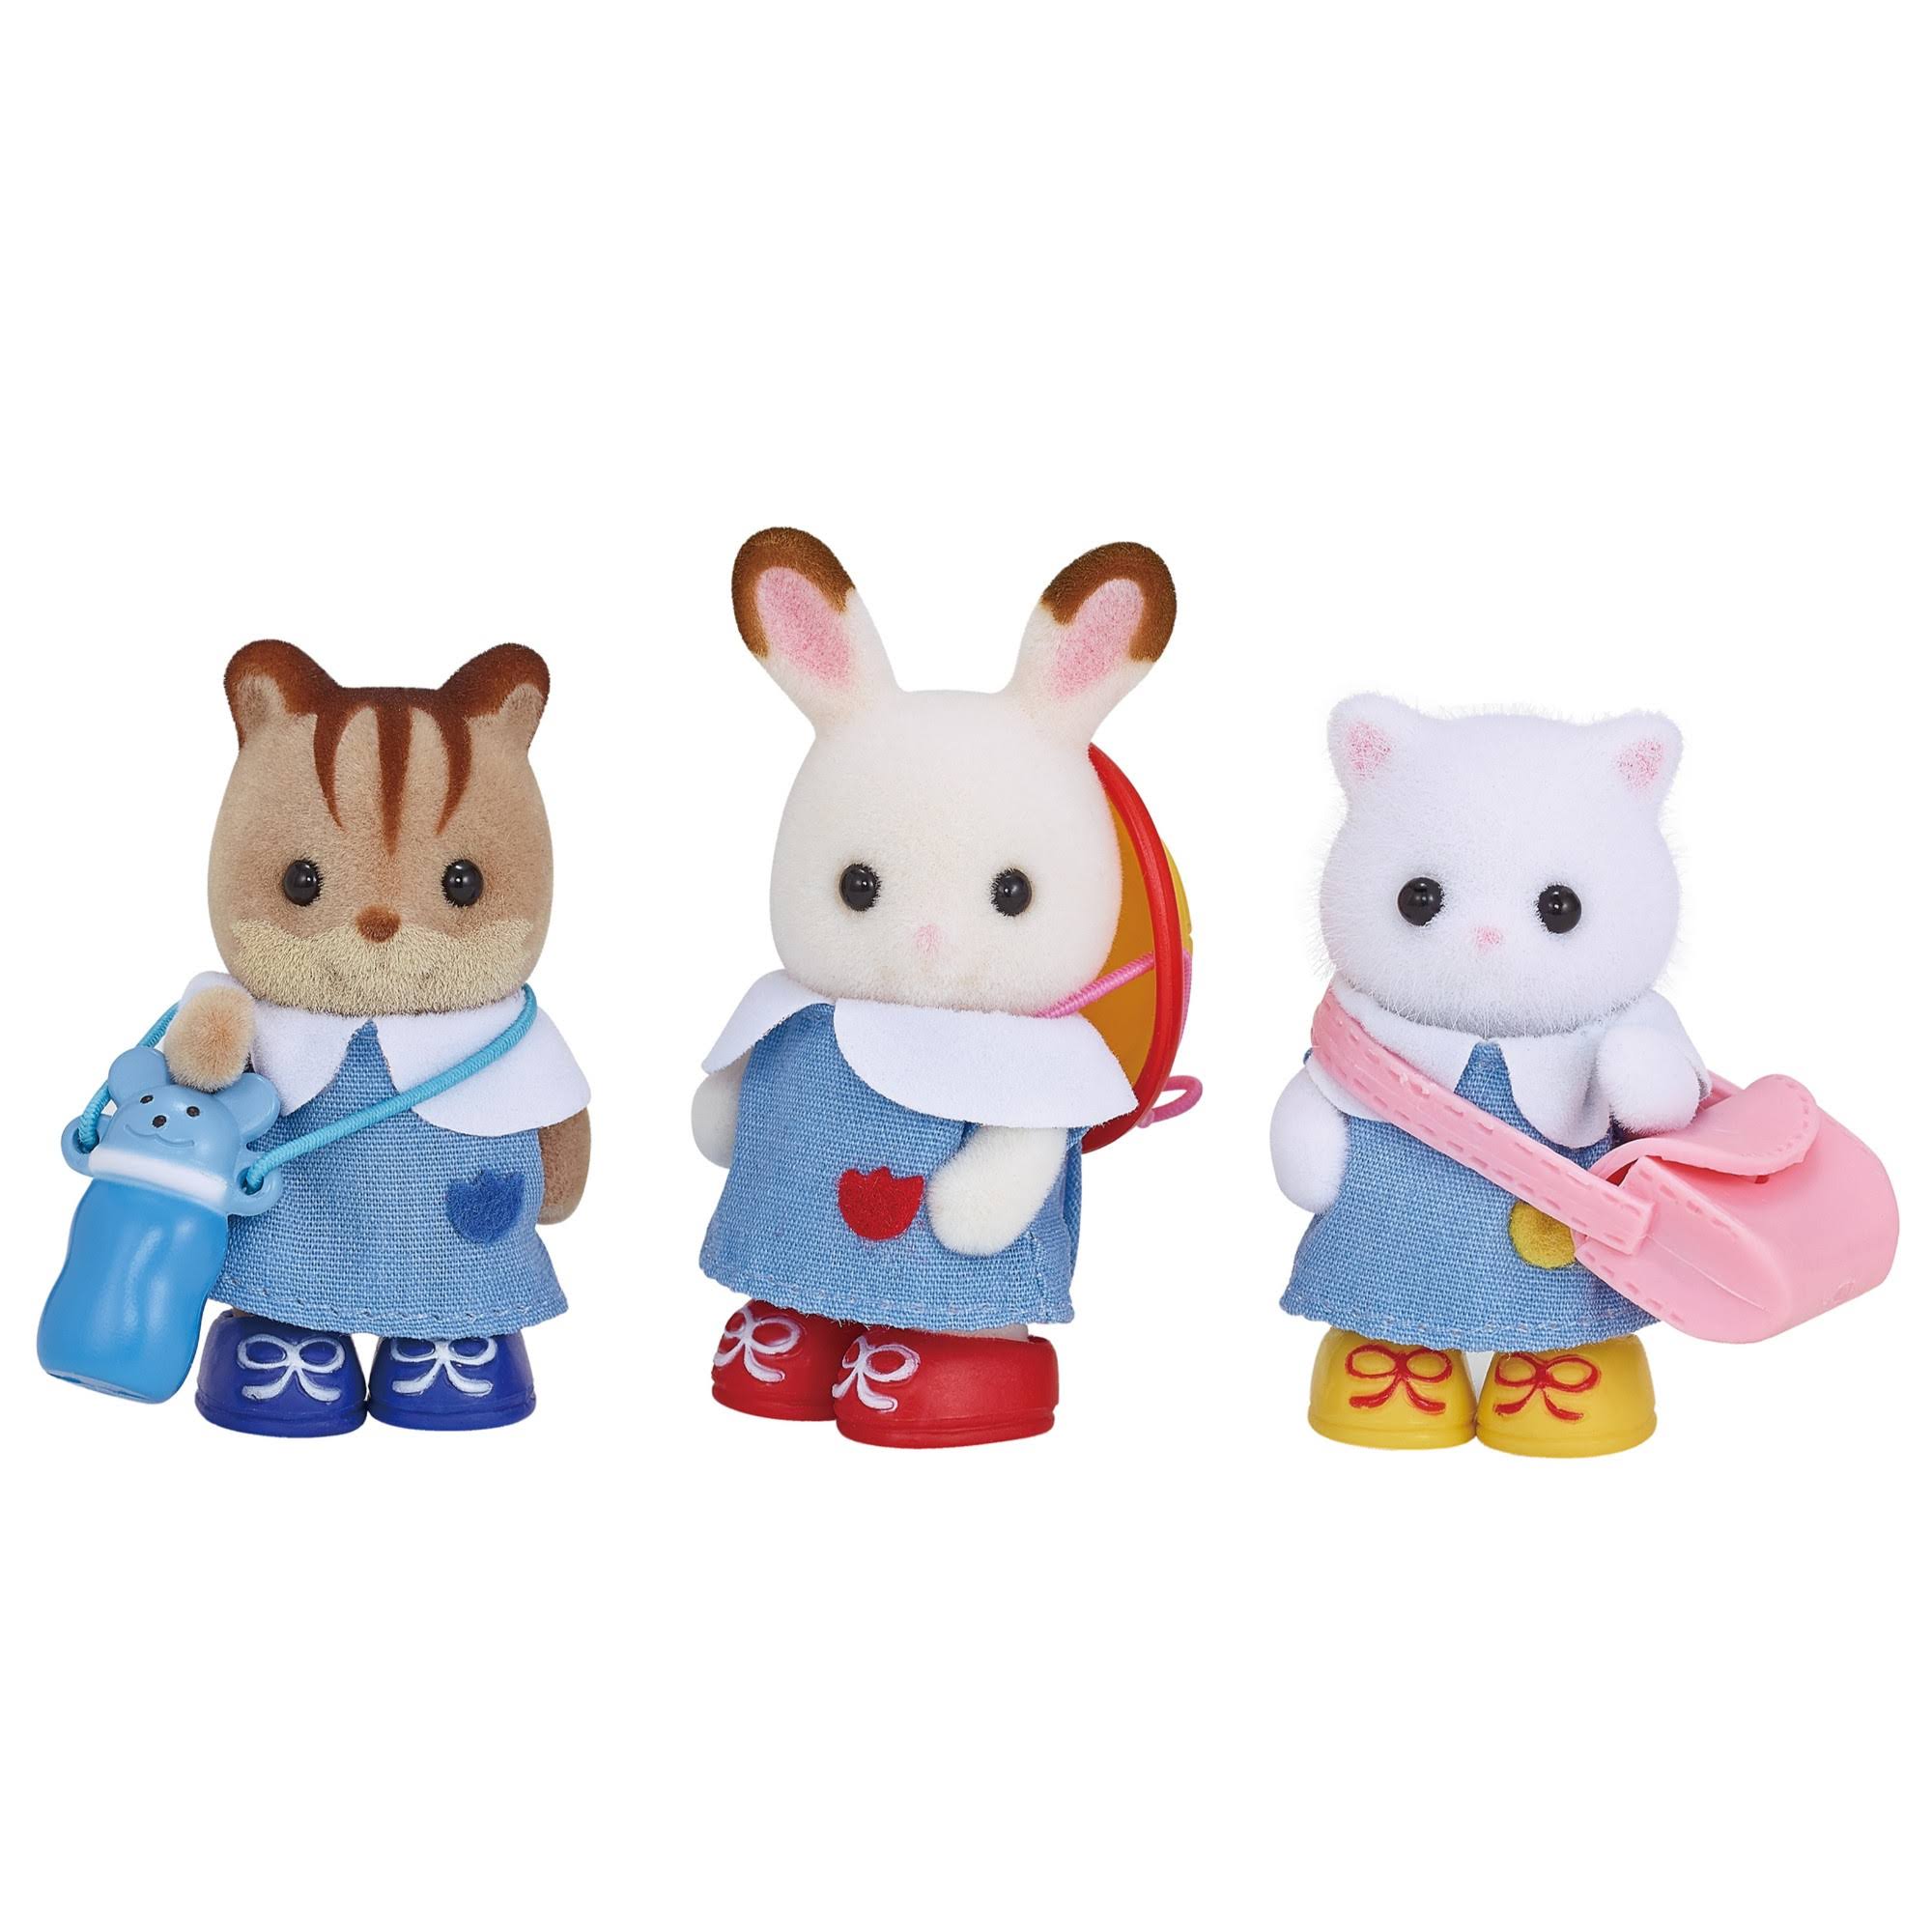 Calico Critters Nursery Friends Set | Calico Critters | Dolls & Accessories